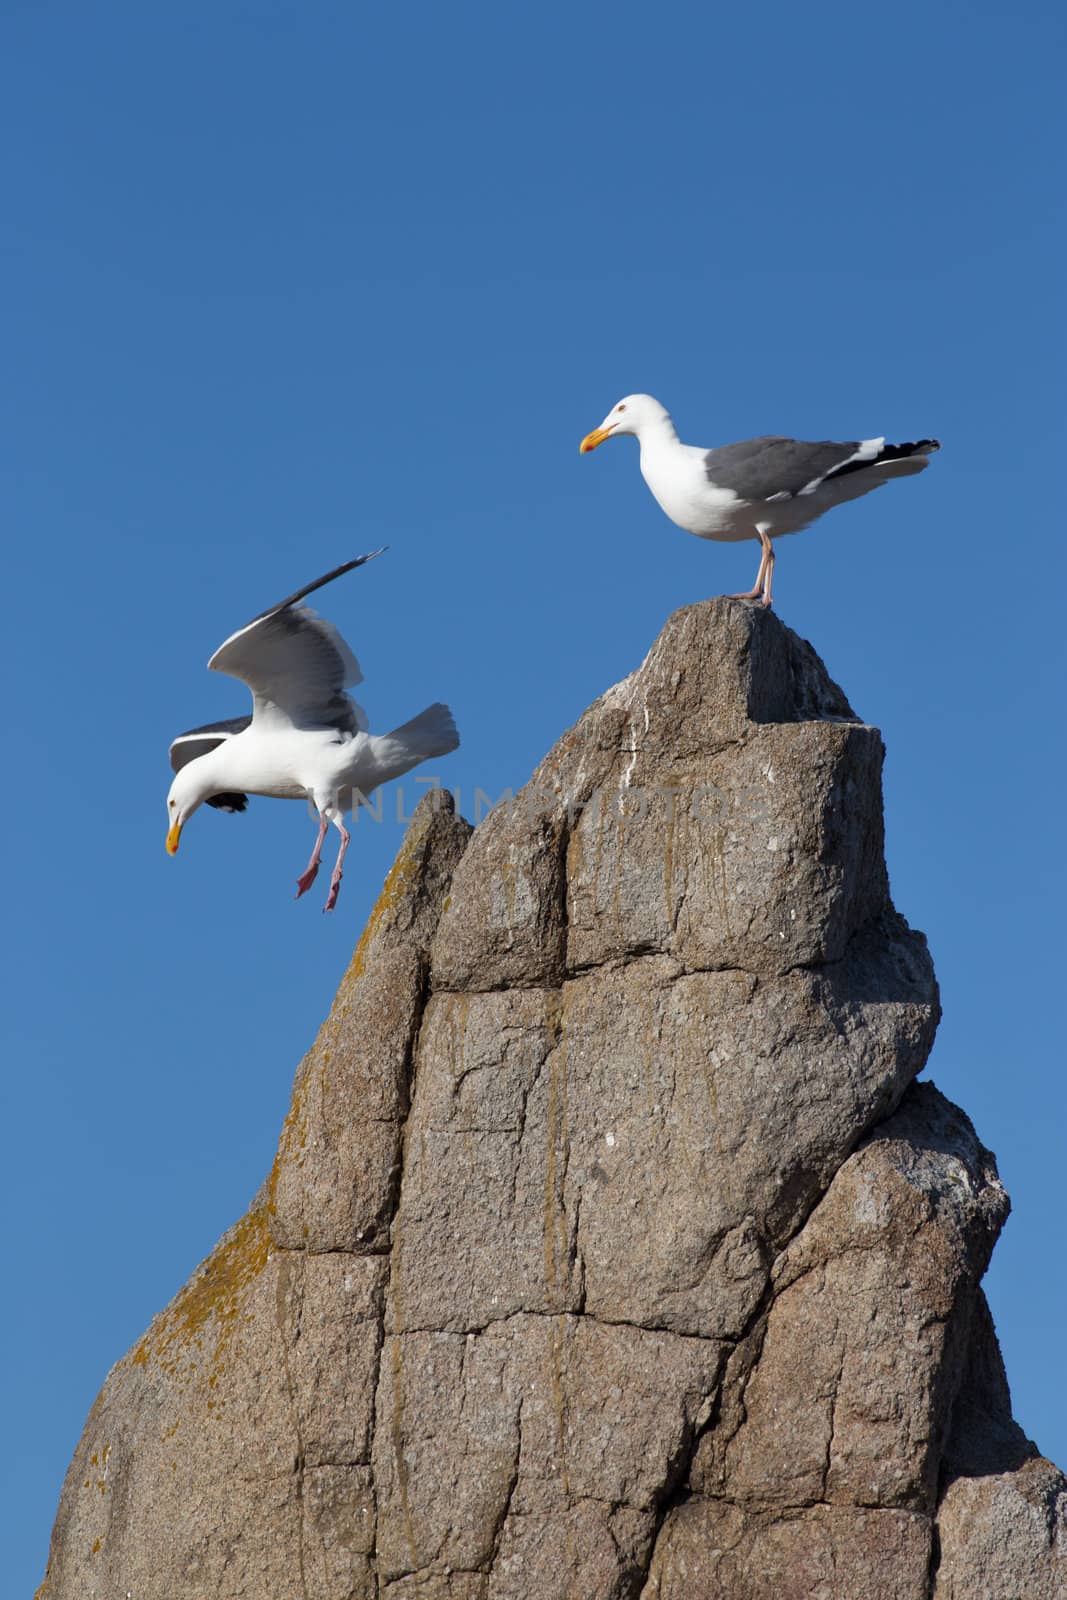 Two Gulls With One in Flight.